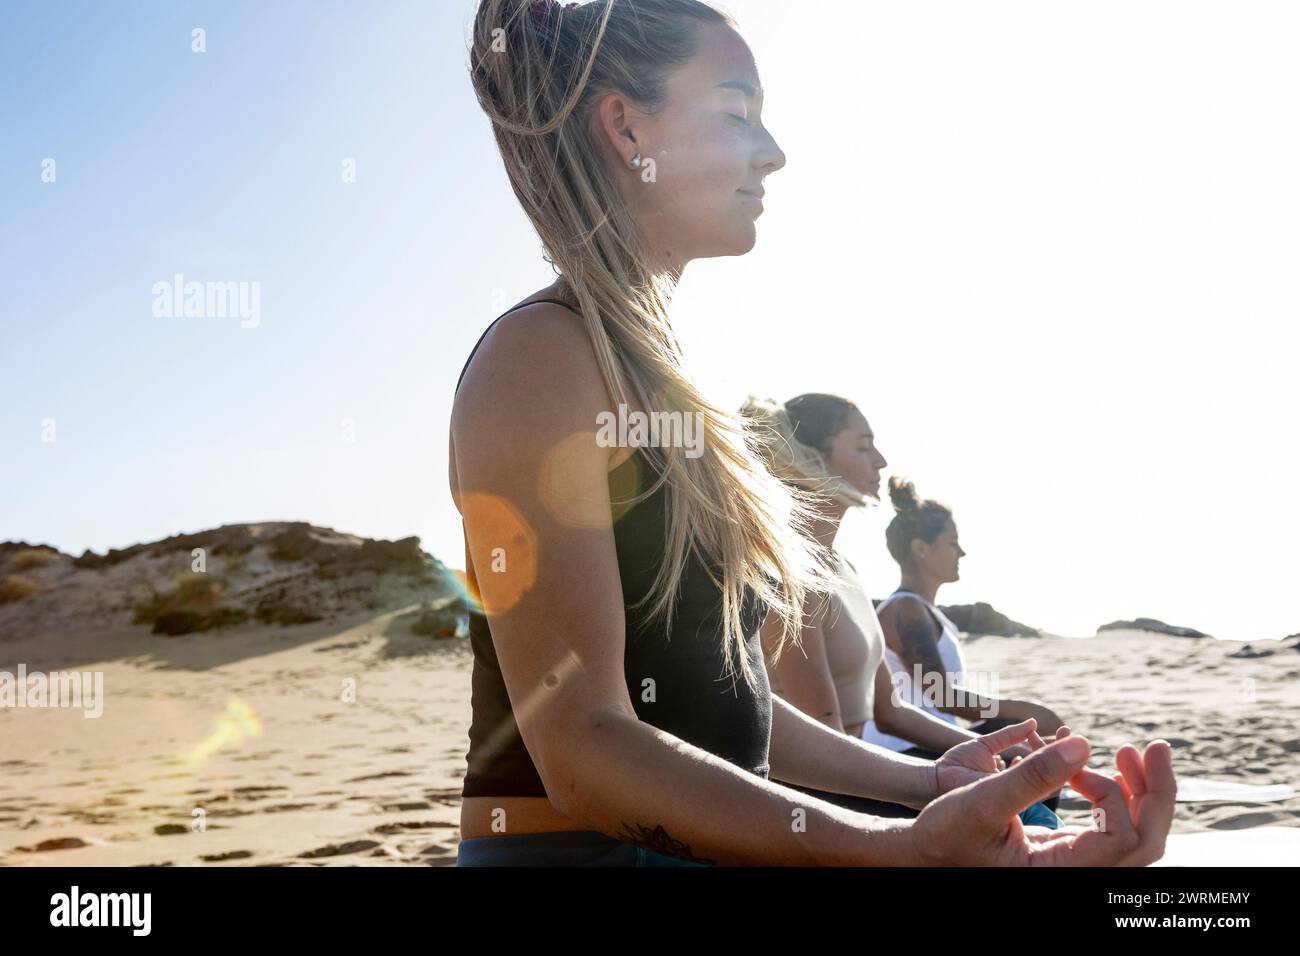 women practice yoga in the peaceful evening ambiance of a beach setting, with gentle waves and the sunset providing a serene backdrop. Stock Photo